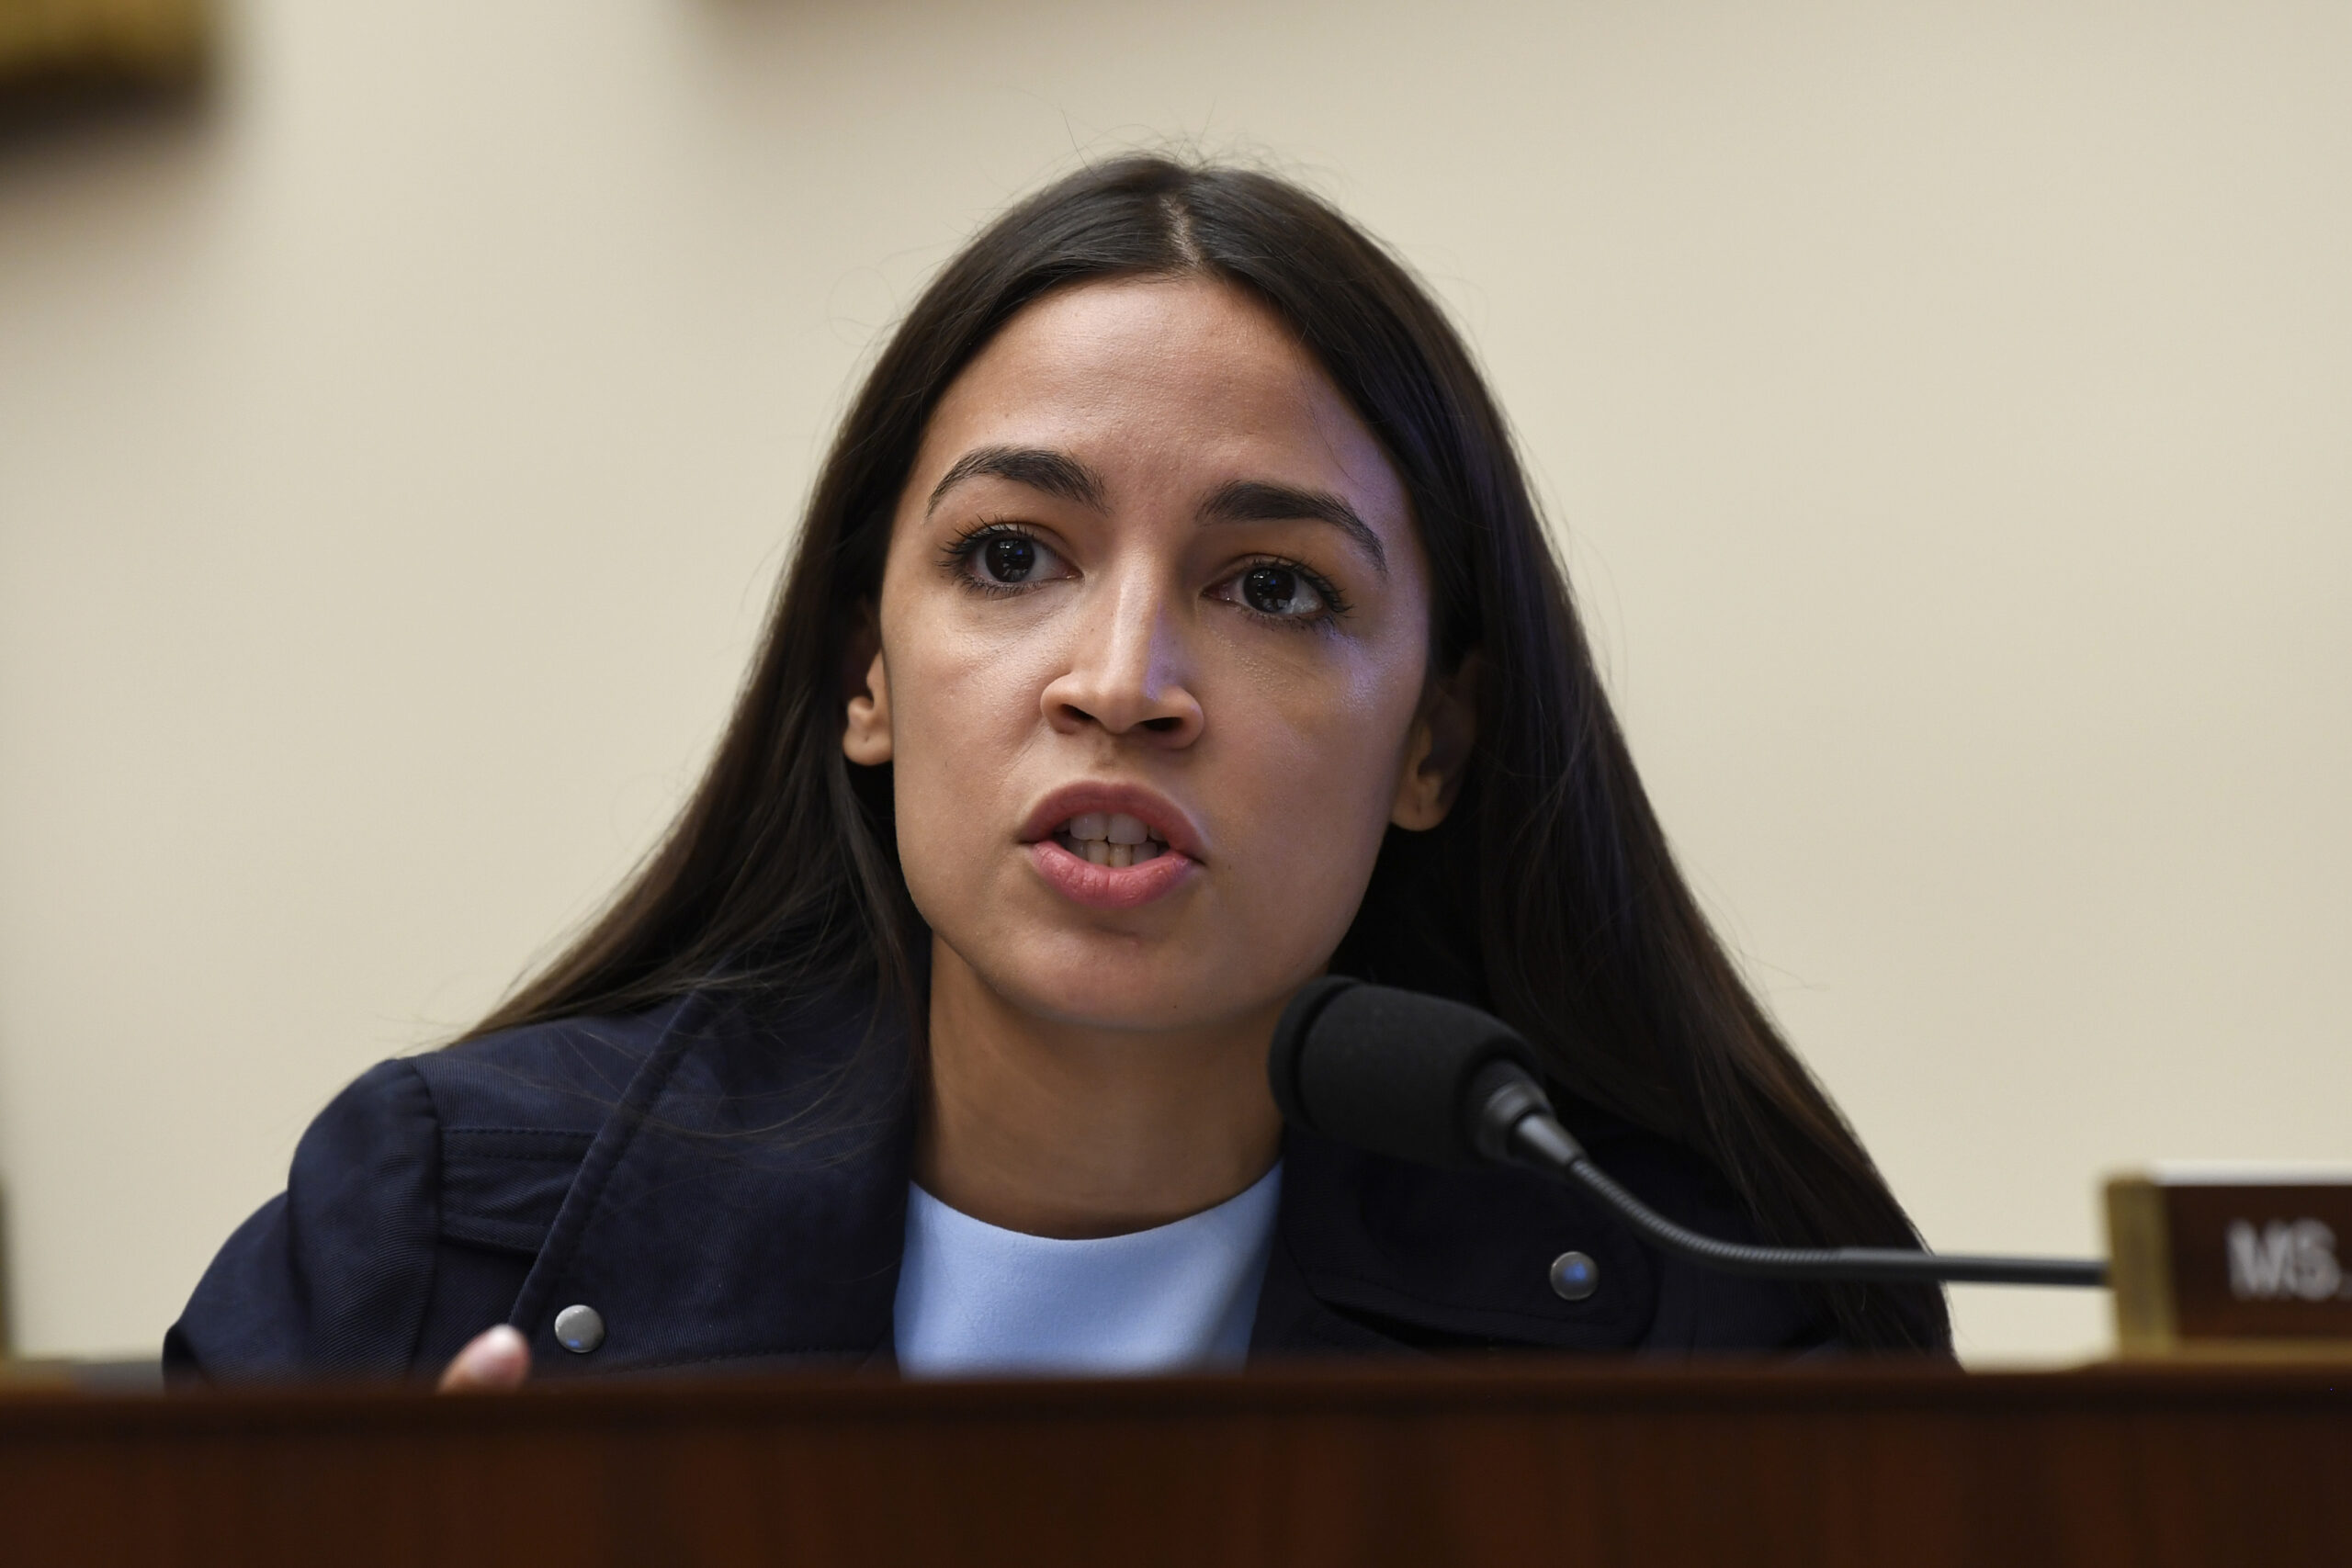 AOC Demands Media Accuse a Private Citizen — Who Has Not Been Charged with Murder — Of Murder